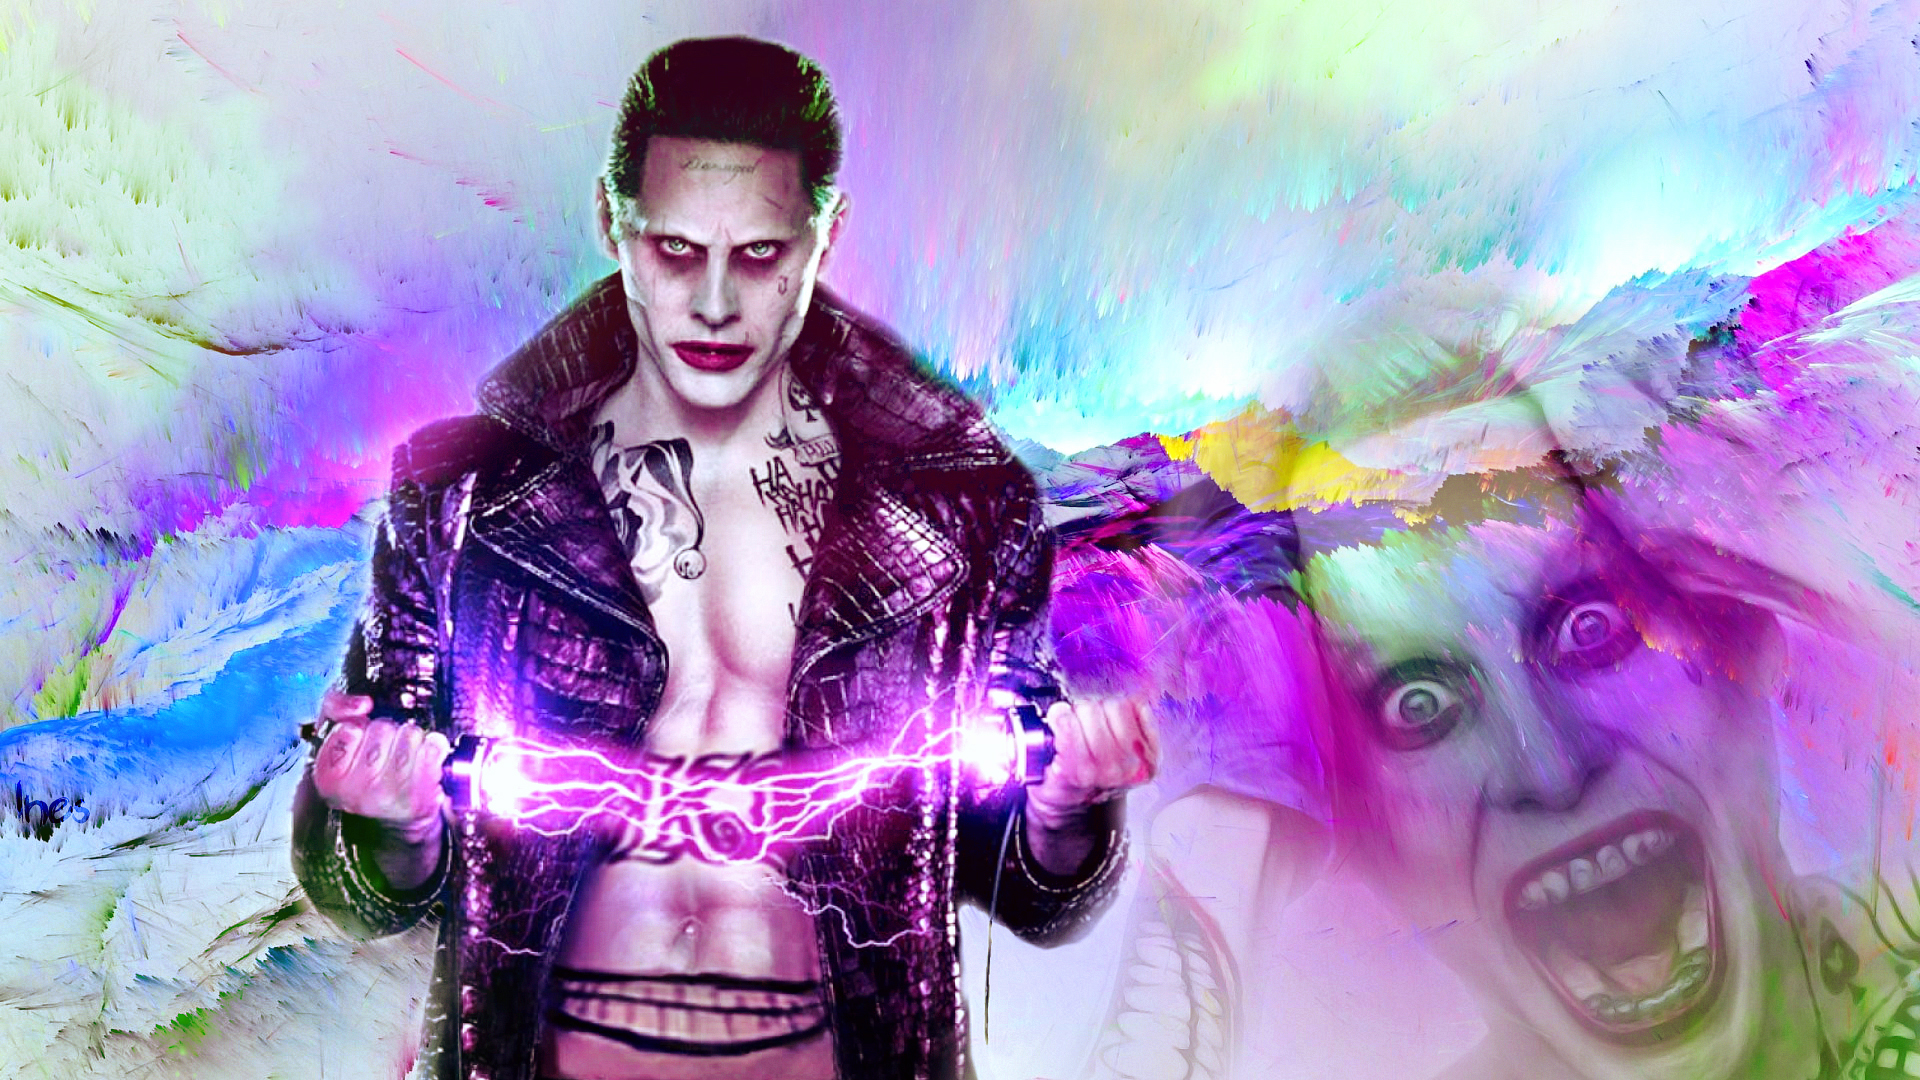 Phone and PC wallpapers made by me - Suicide Squad Wallpaper (39839467) -  Fanpop